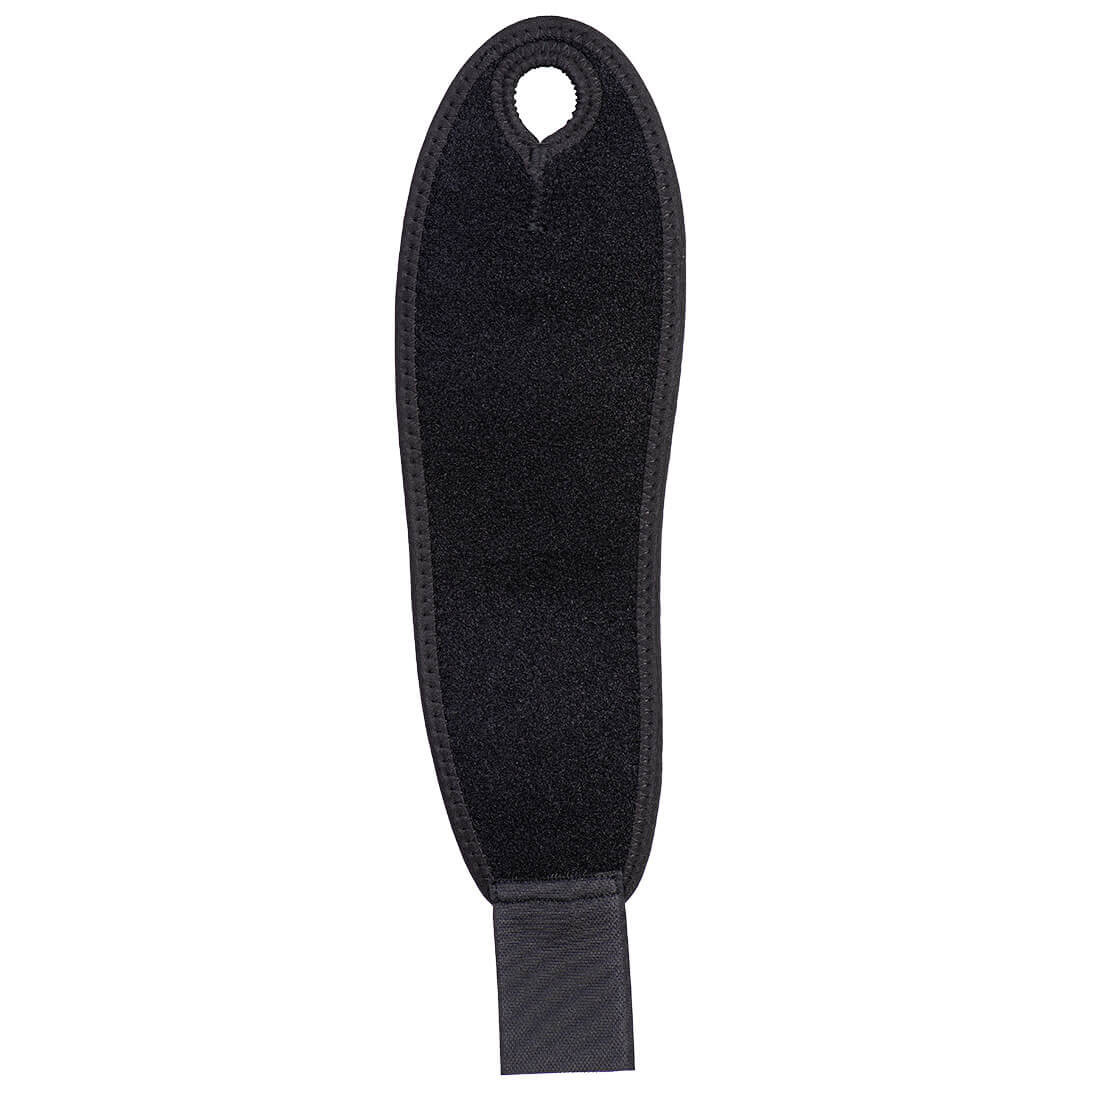 Wrist Support Strap (Pk2) - Personal protection